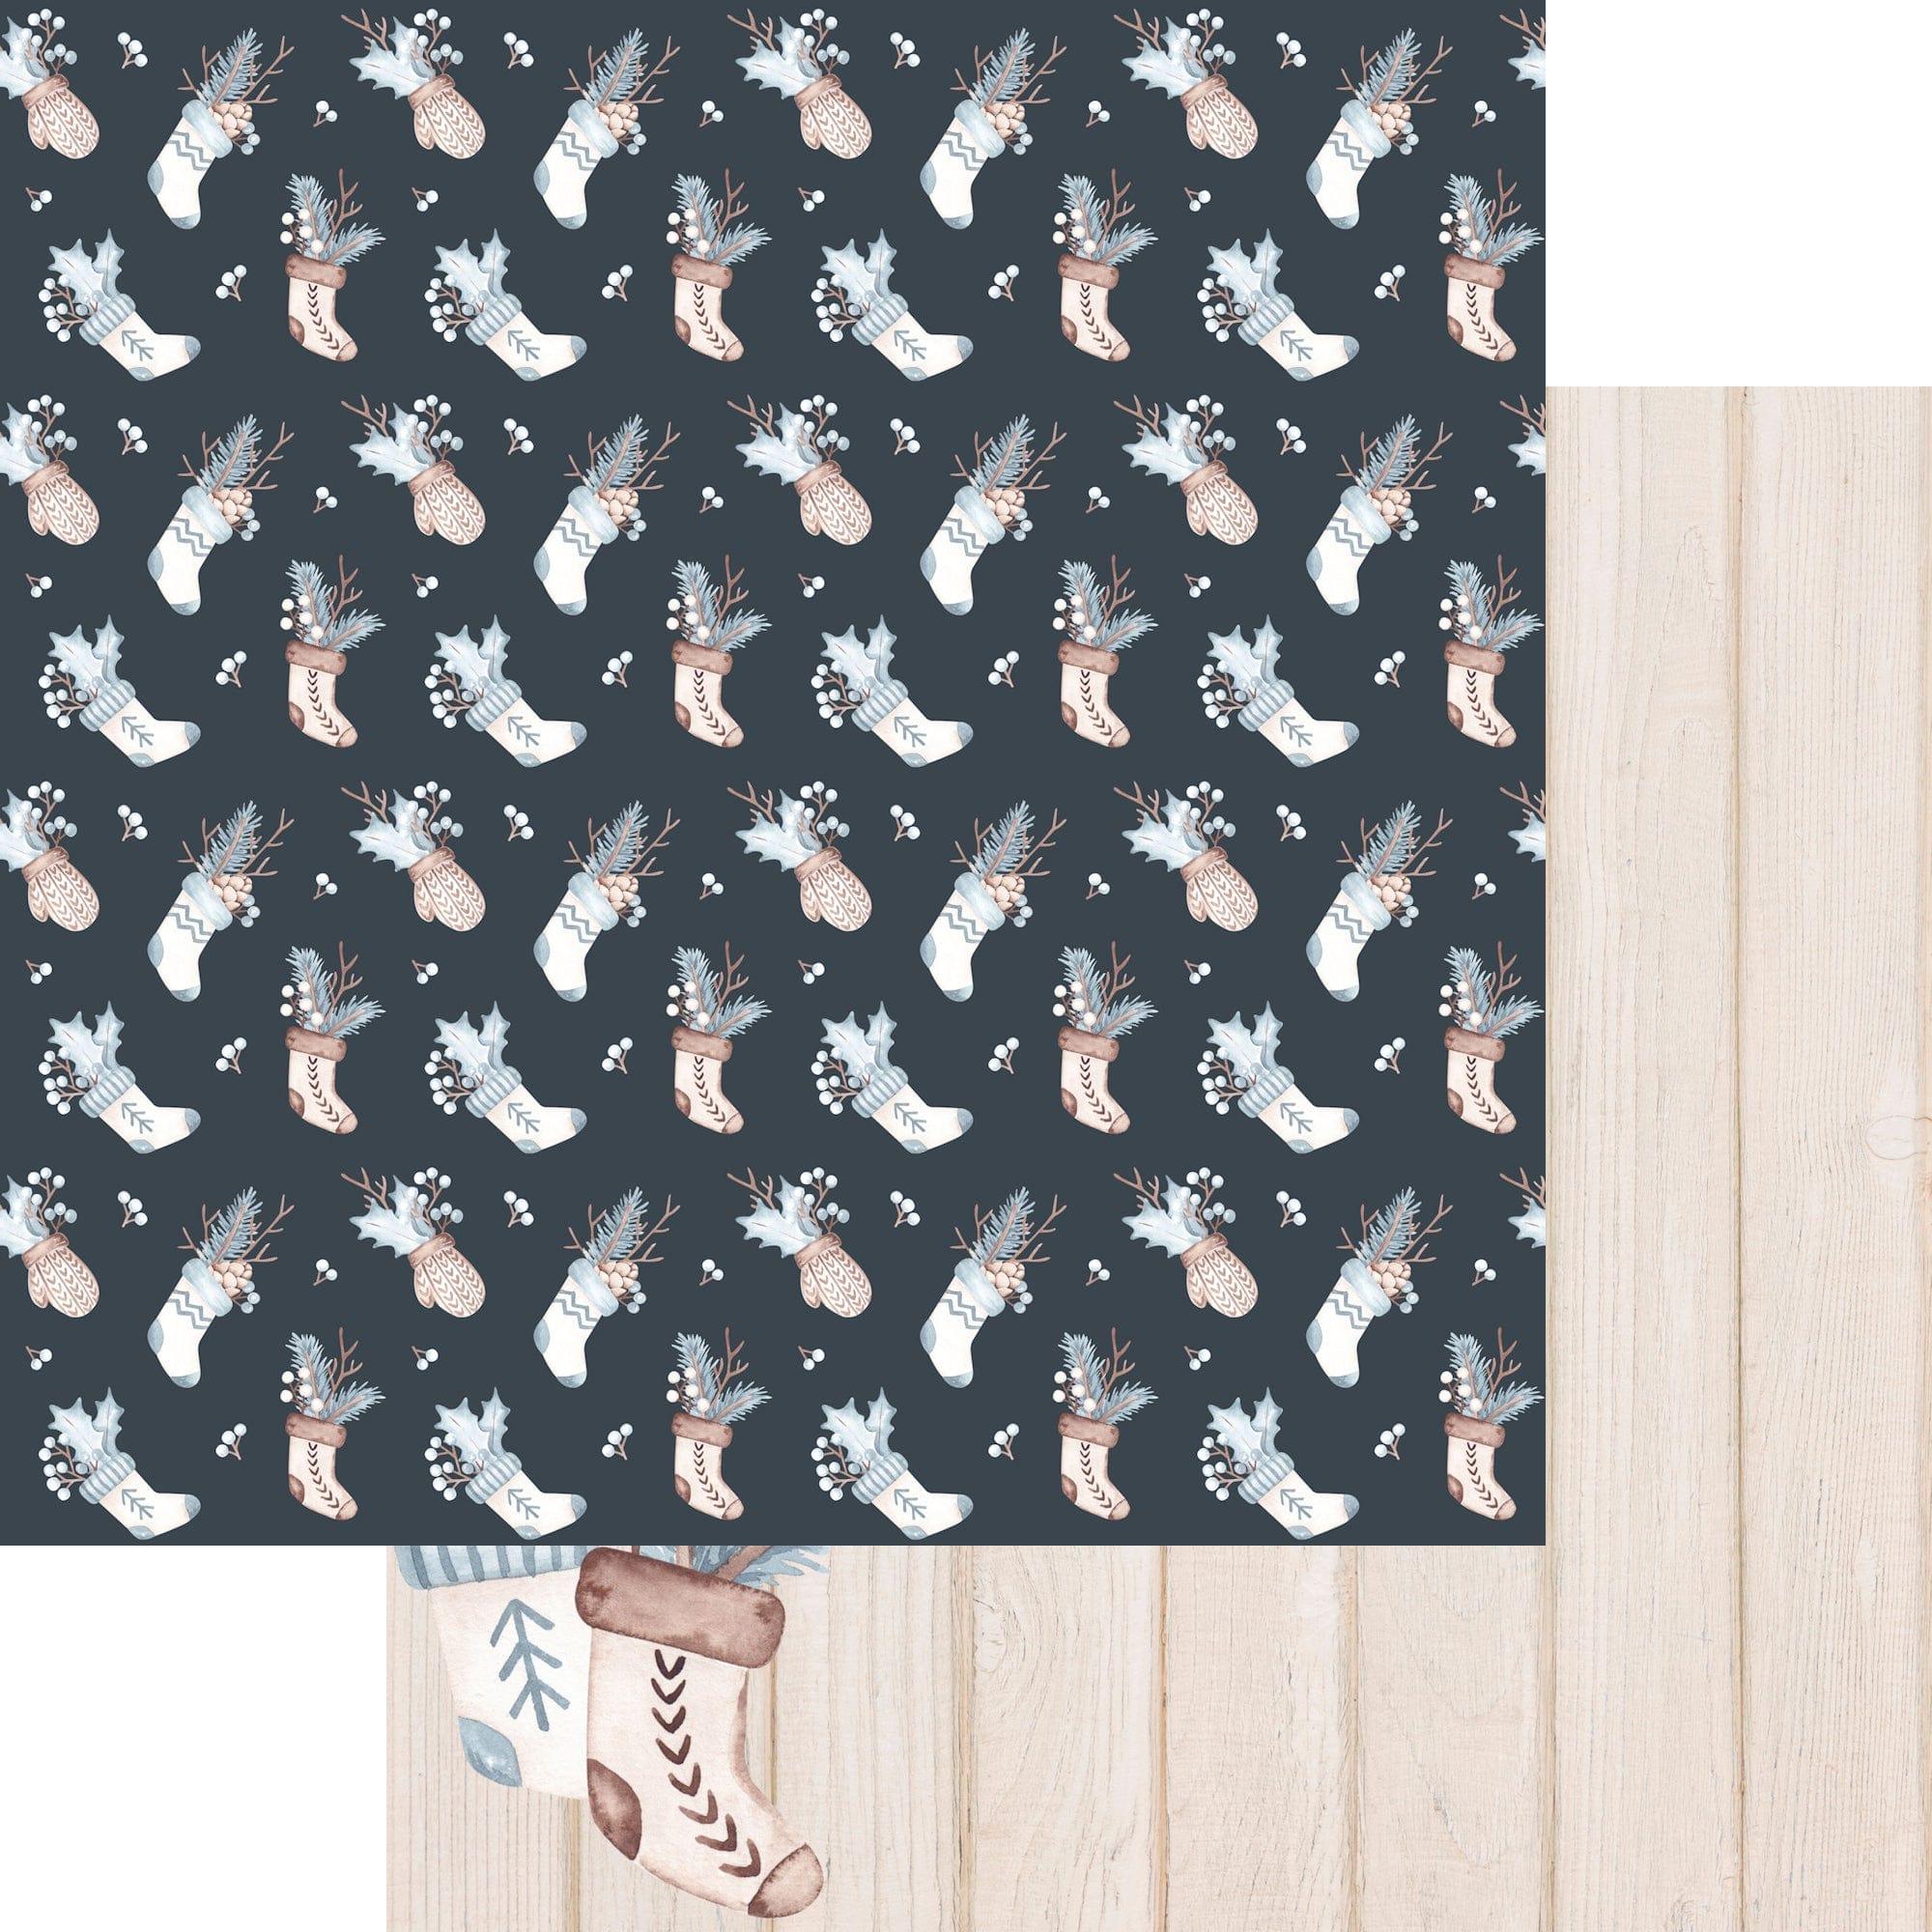 Winter Penguins Collection Stockings 12 x 12 Double-Sided Scrapbook Paper by SSC Designs - Scrapbook Supply Companies